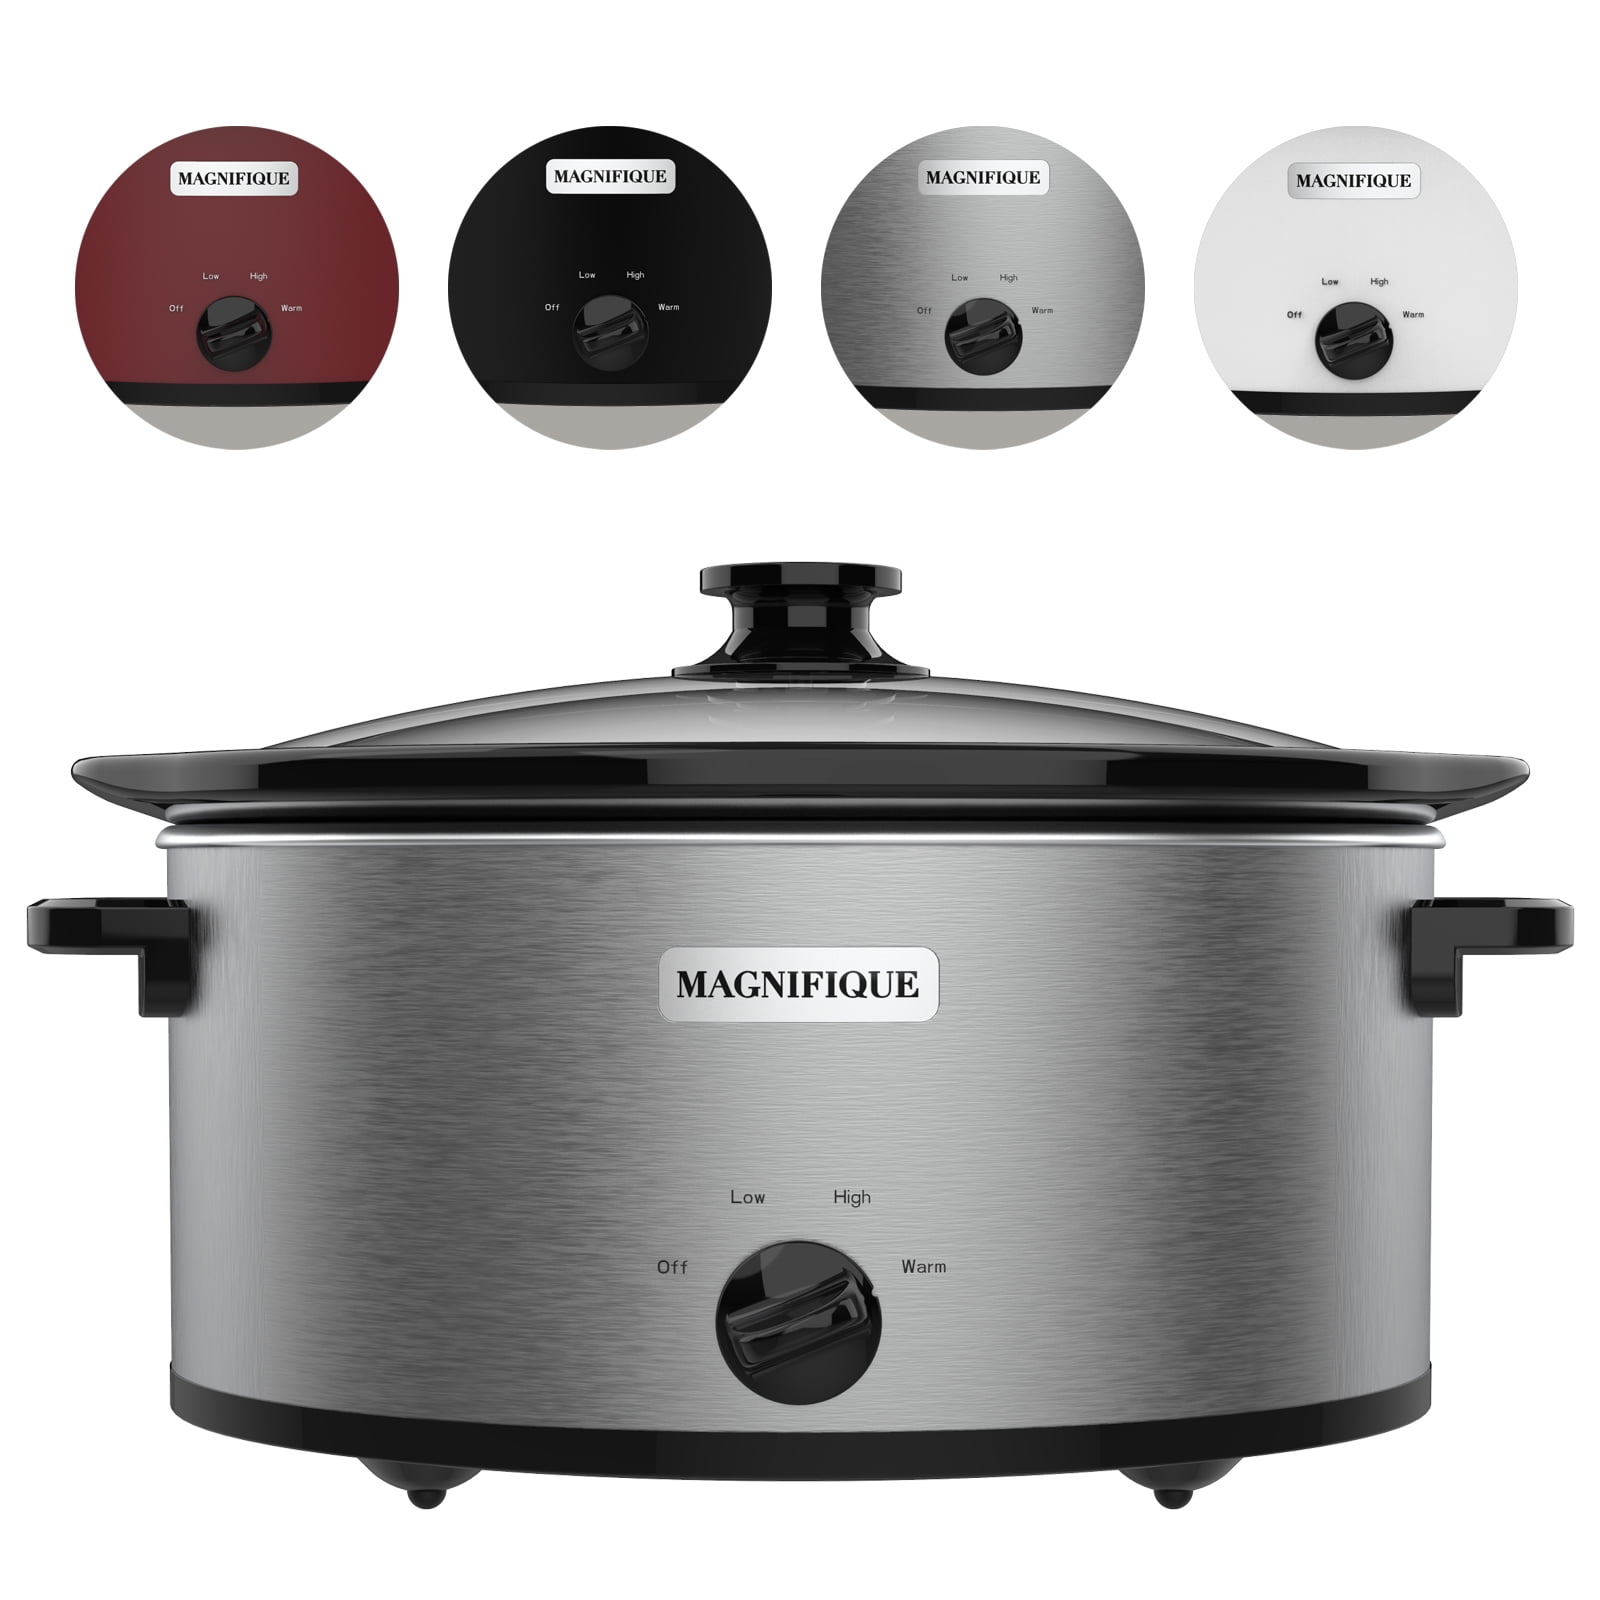 CozyHom 4.5QT Electric Slow Cooker 3 in 1, 3-Pots Stainless Steel Buffet  Server Food Slow Cooker With Adjustable Temp Removable Lid Rests Triple  Pot